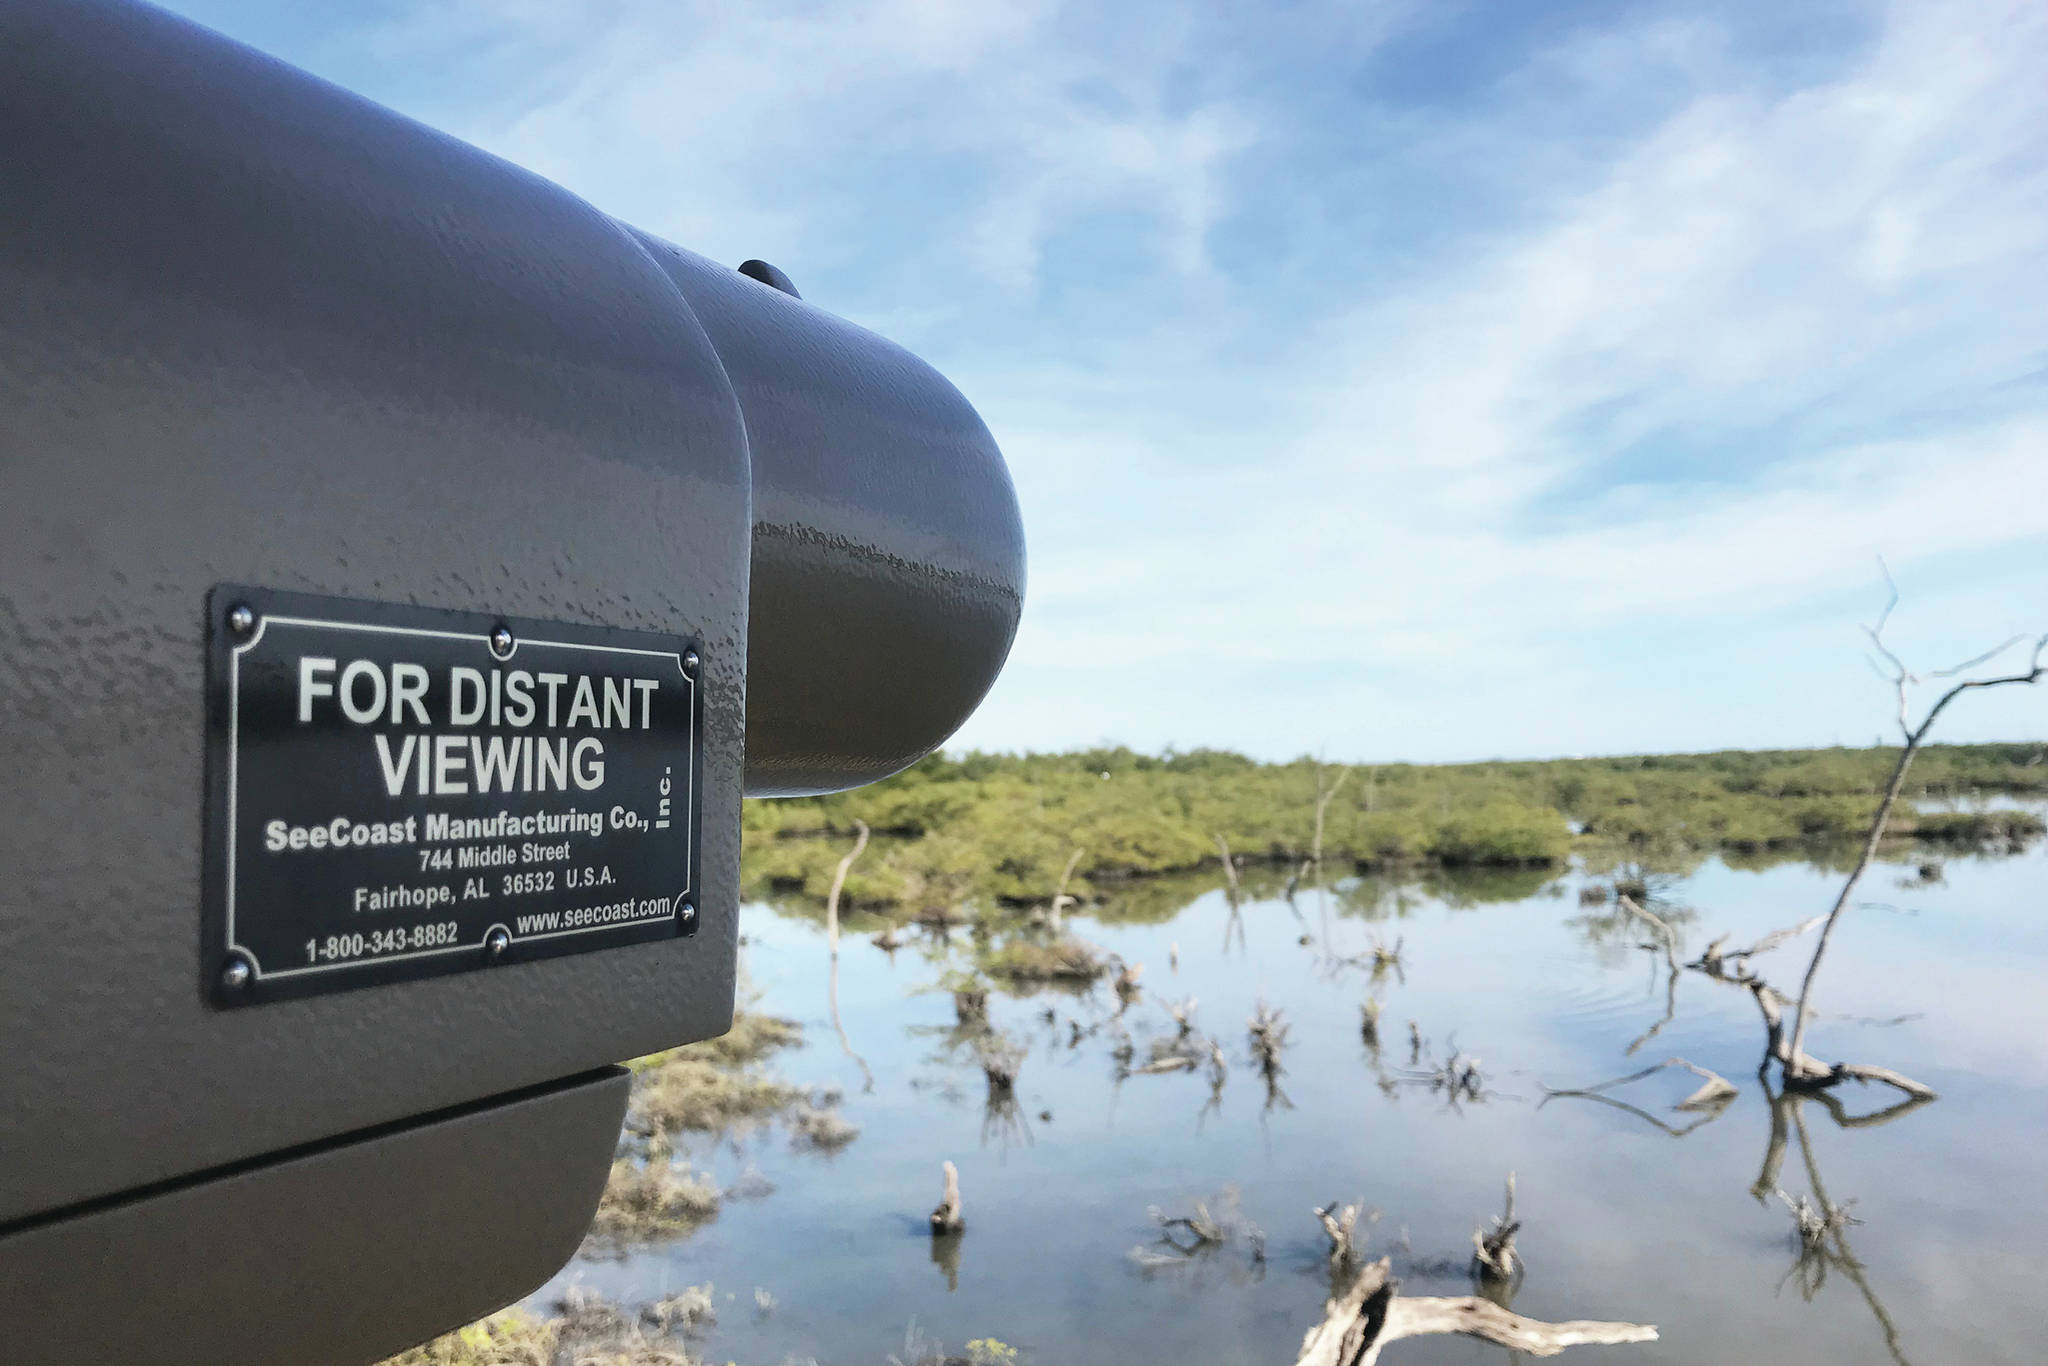 A scope looks out at a wetland at Pelican Island Wildlife Refuge on Nov. 27 near Vero Beach, Florida. (Photo by Kat Sorensen)